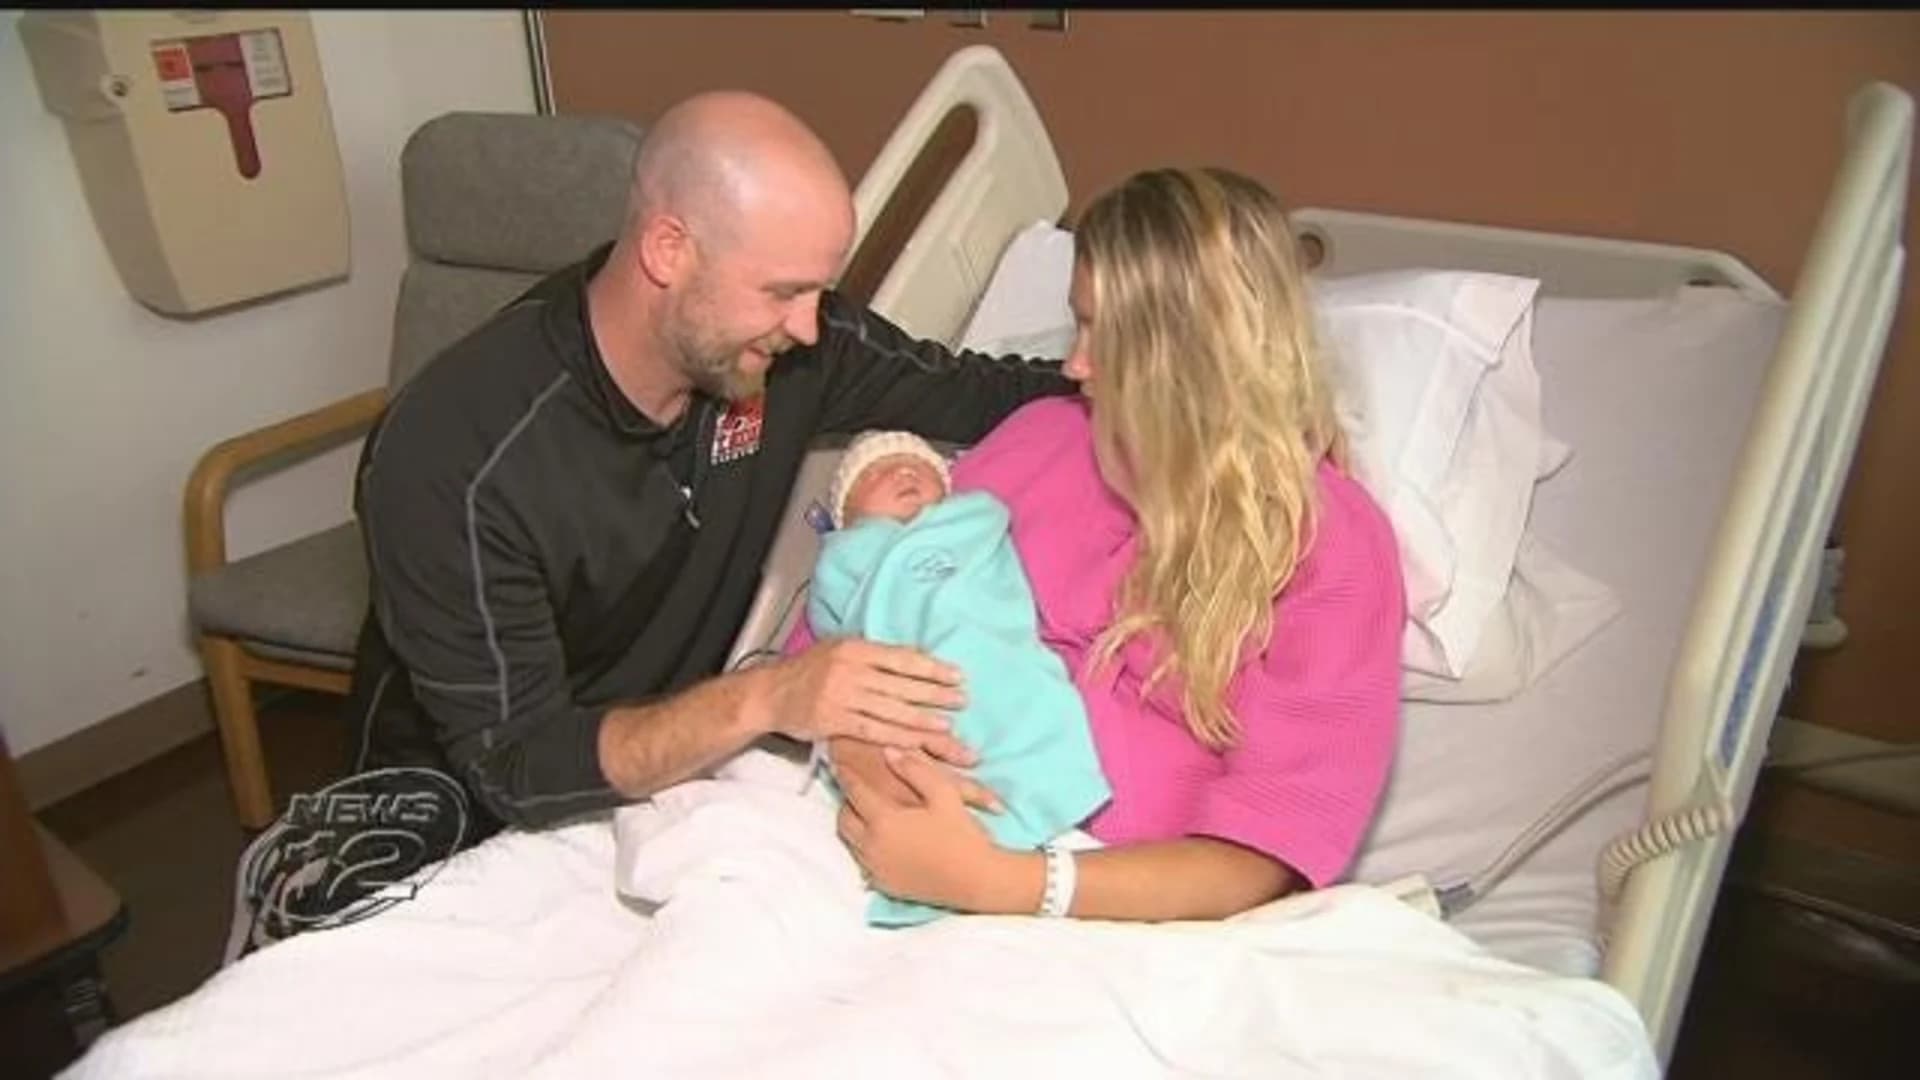 Mount Sinai man helps wife deliver baby inside kitchen